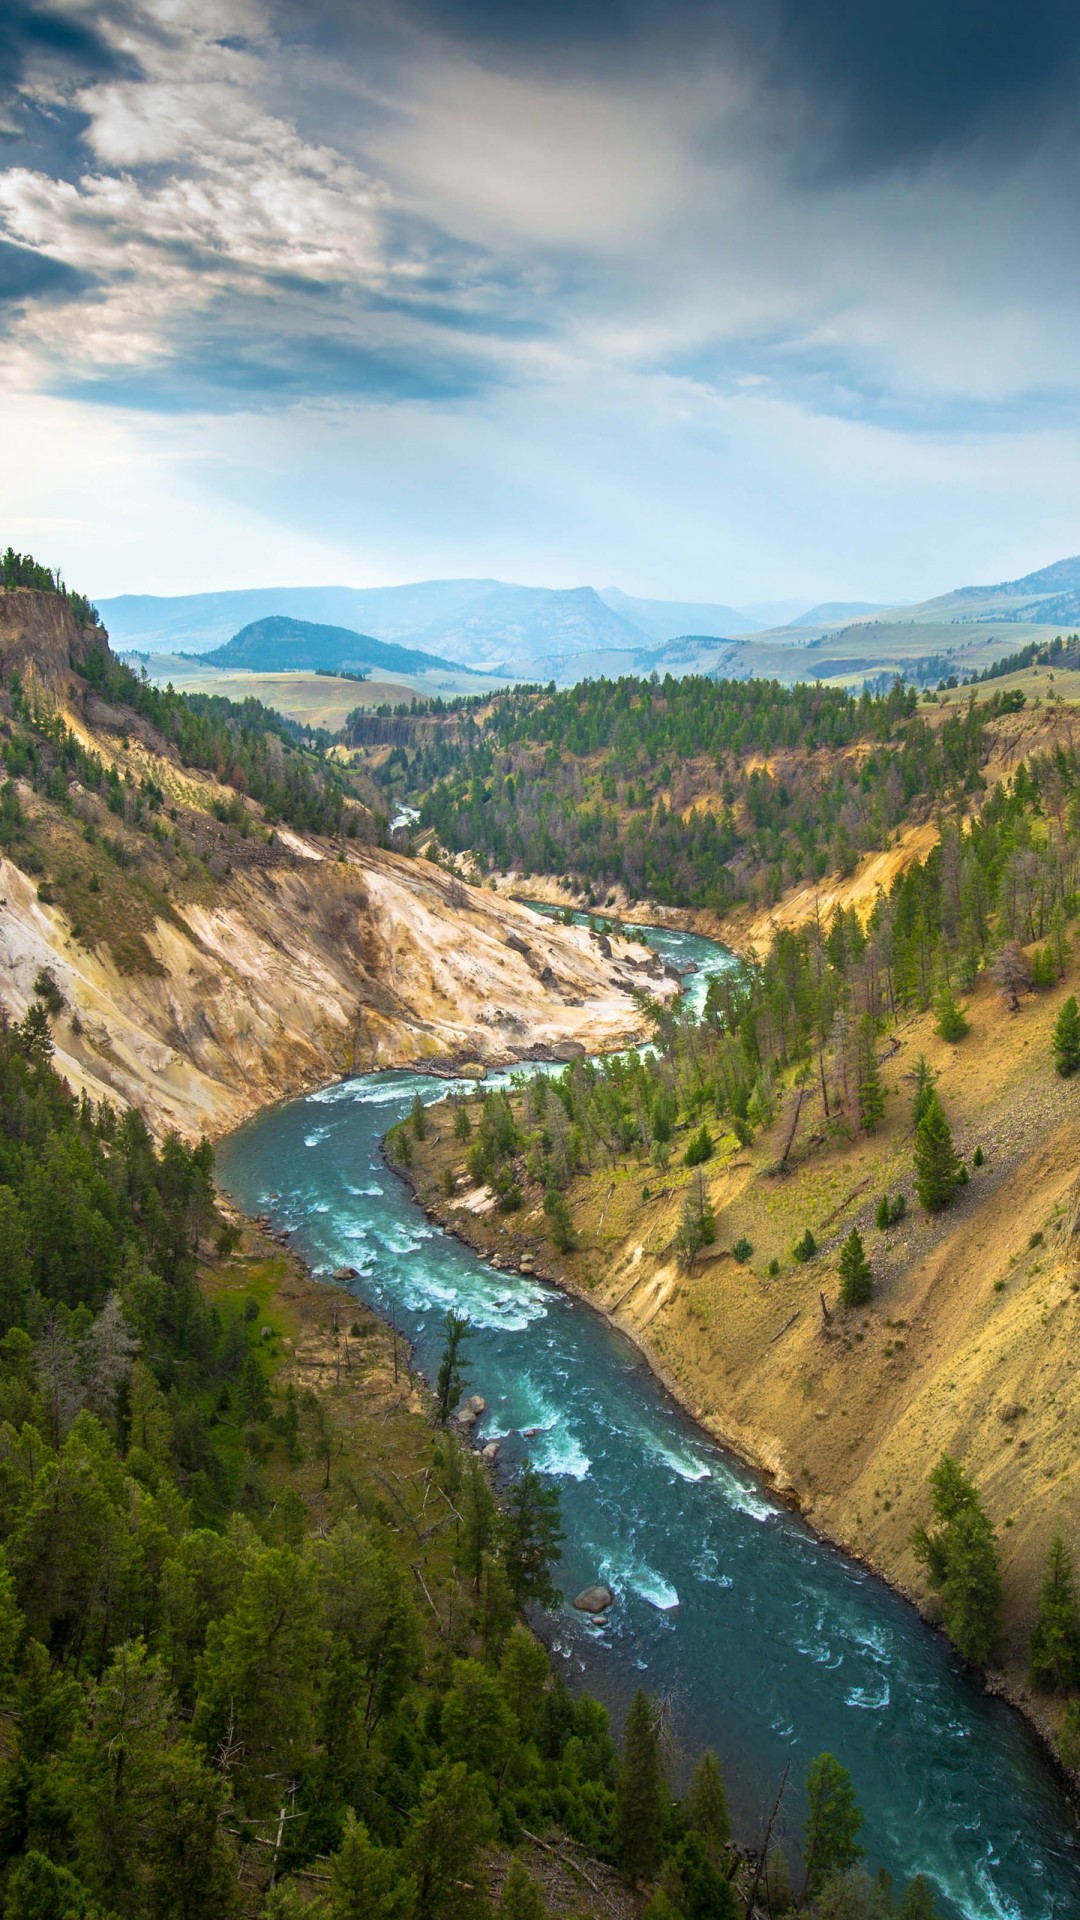 The River, Grand Canyon of Yellowstone National Park, USA Wallpaper for LG G2